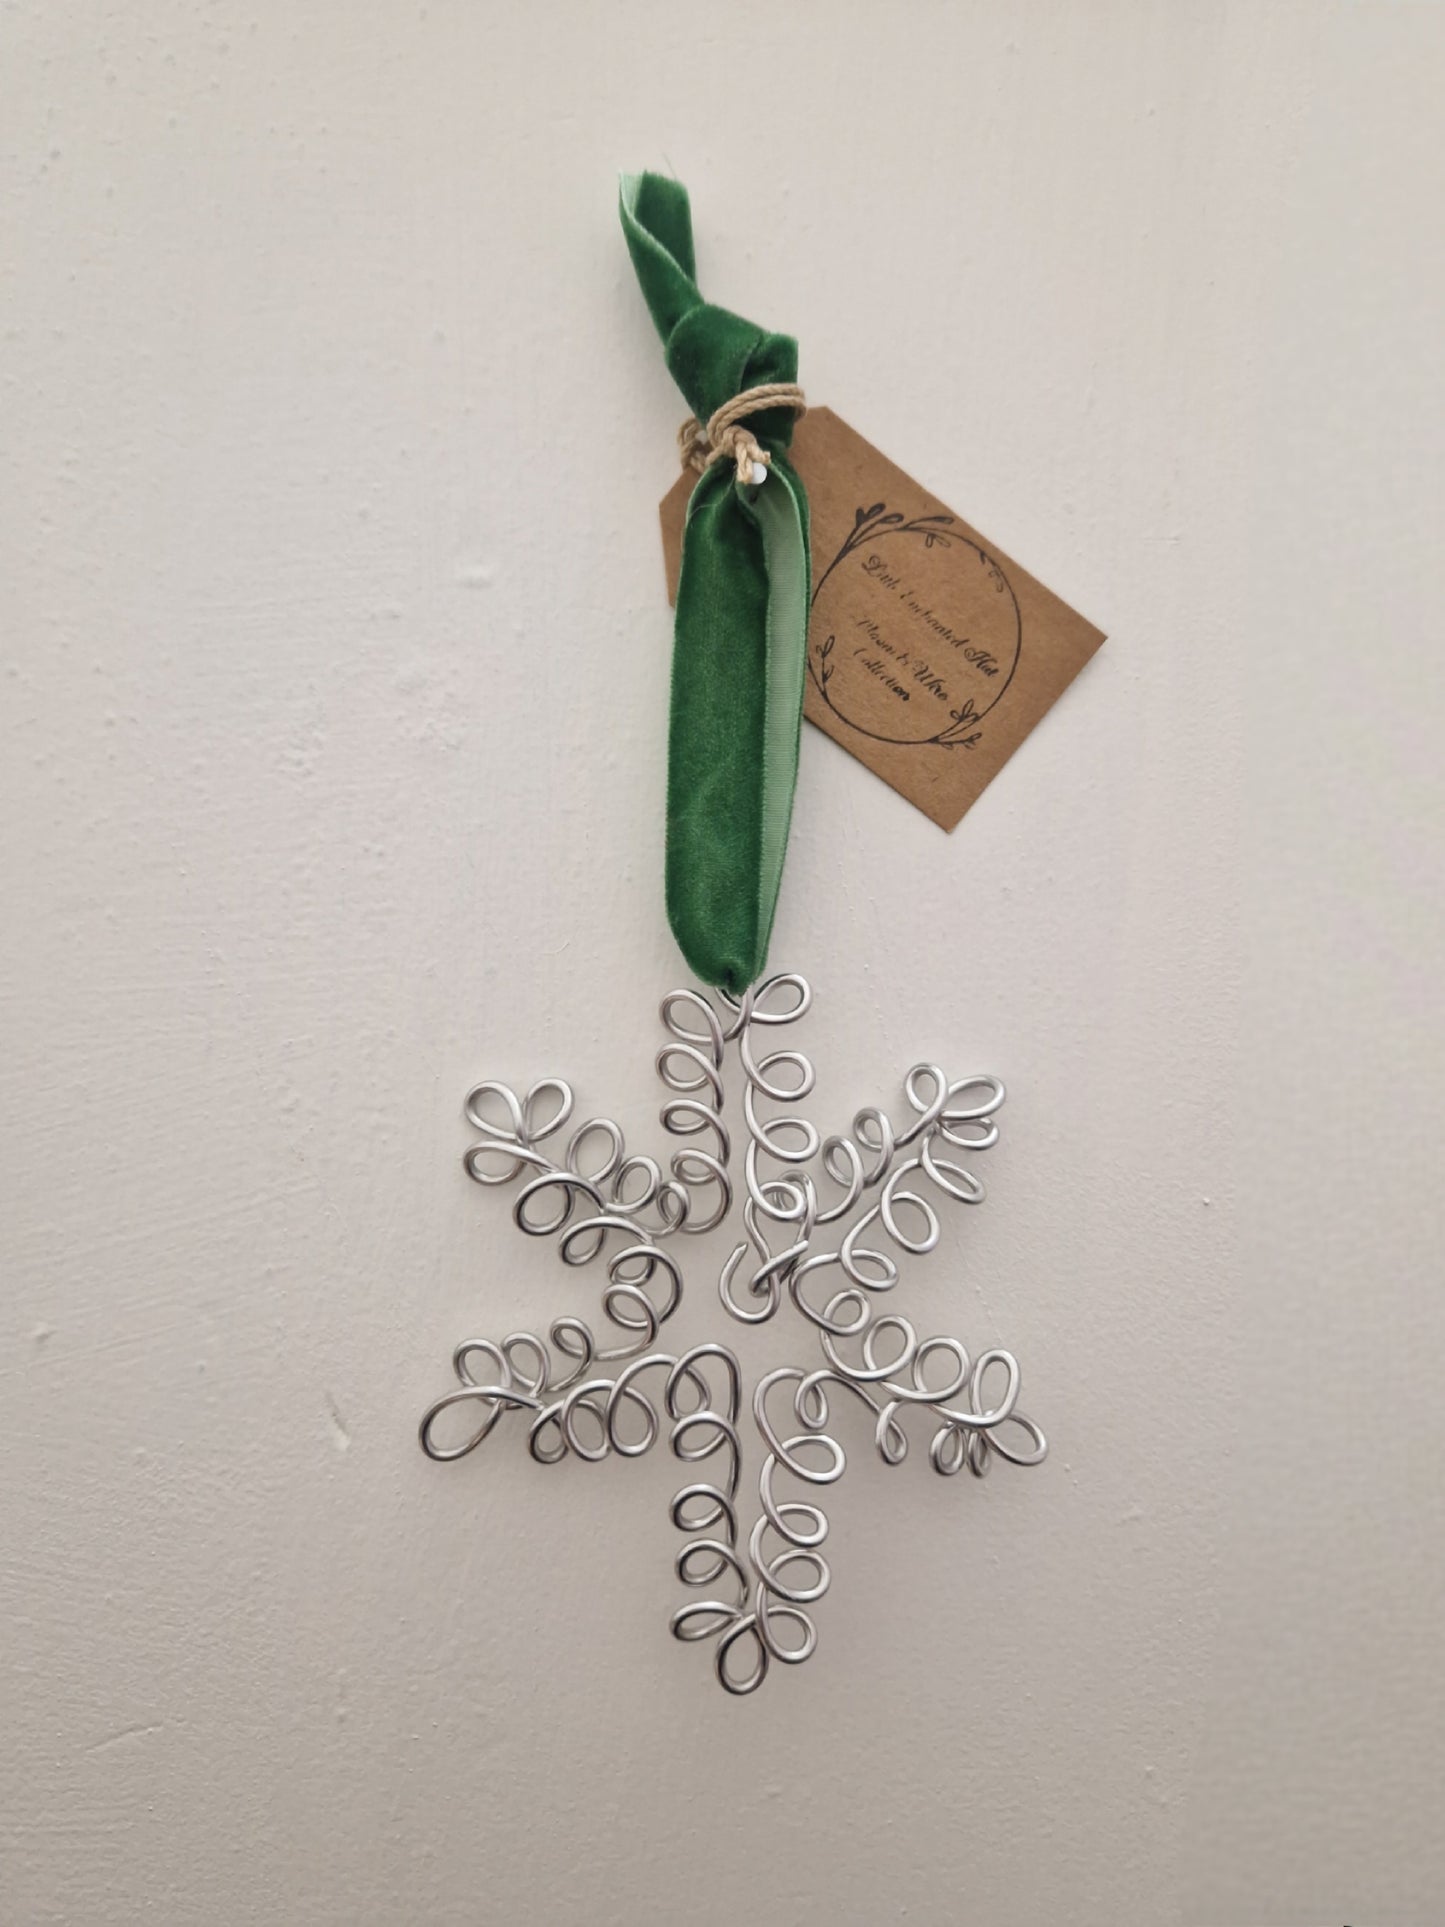 Handcrafted wire sculptured Christmas decorations.